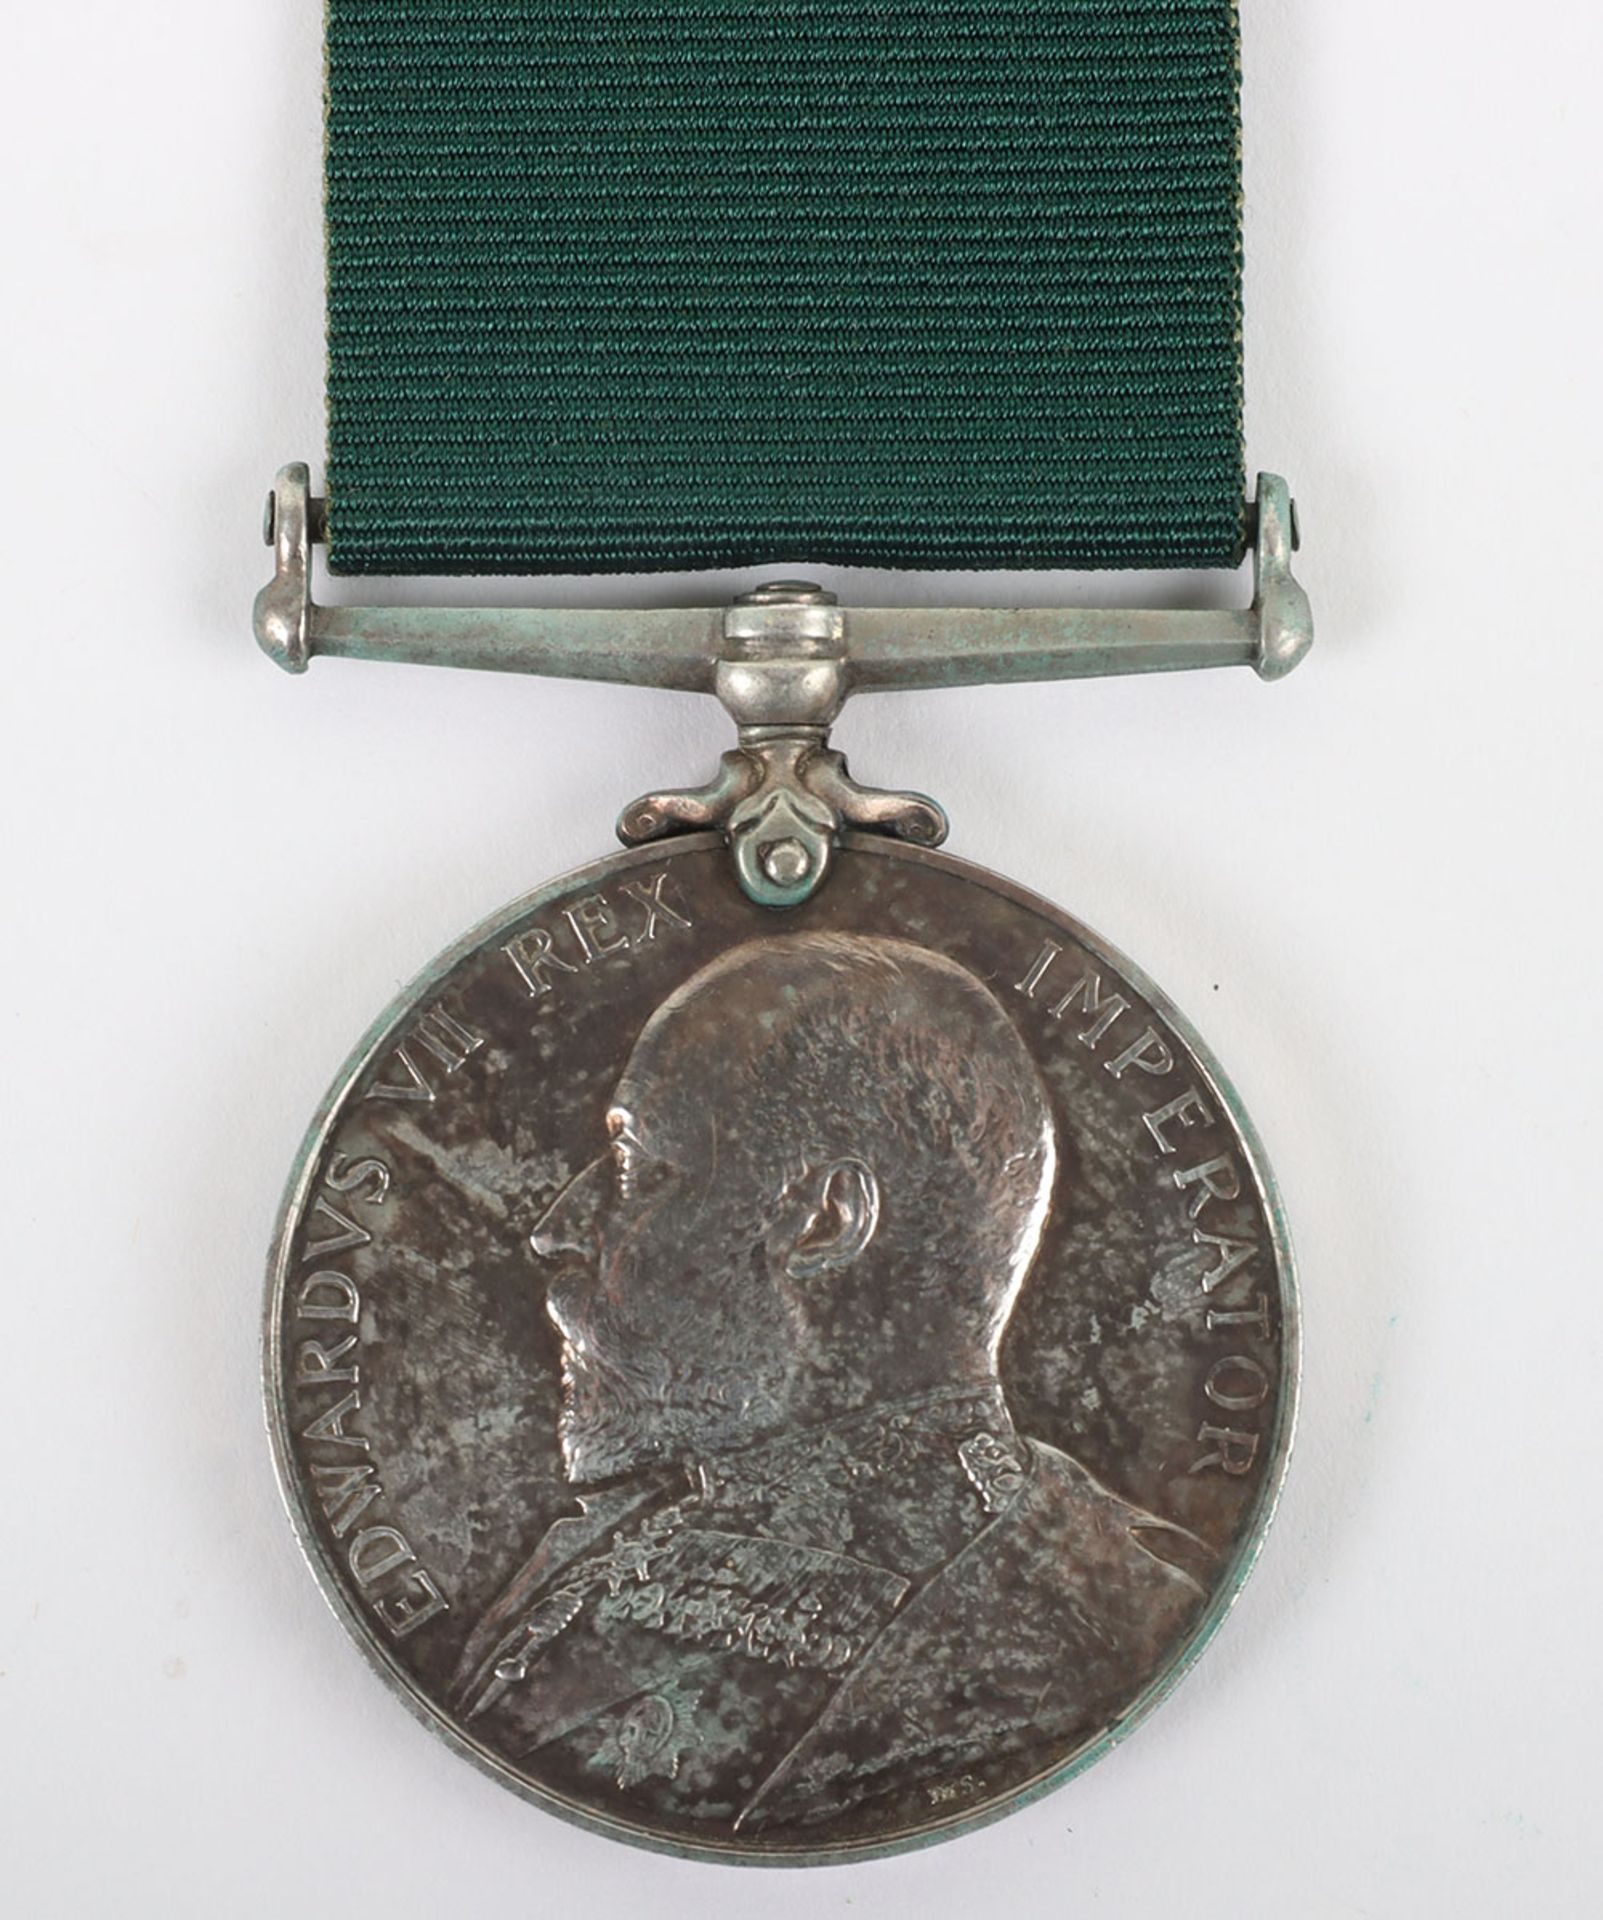 Edwardian Volunteer Long Service Medal to a Bugler in the 2nd Middlesex Volunteer Rifle Company